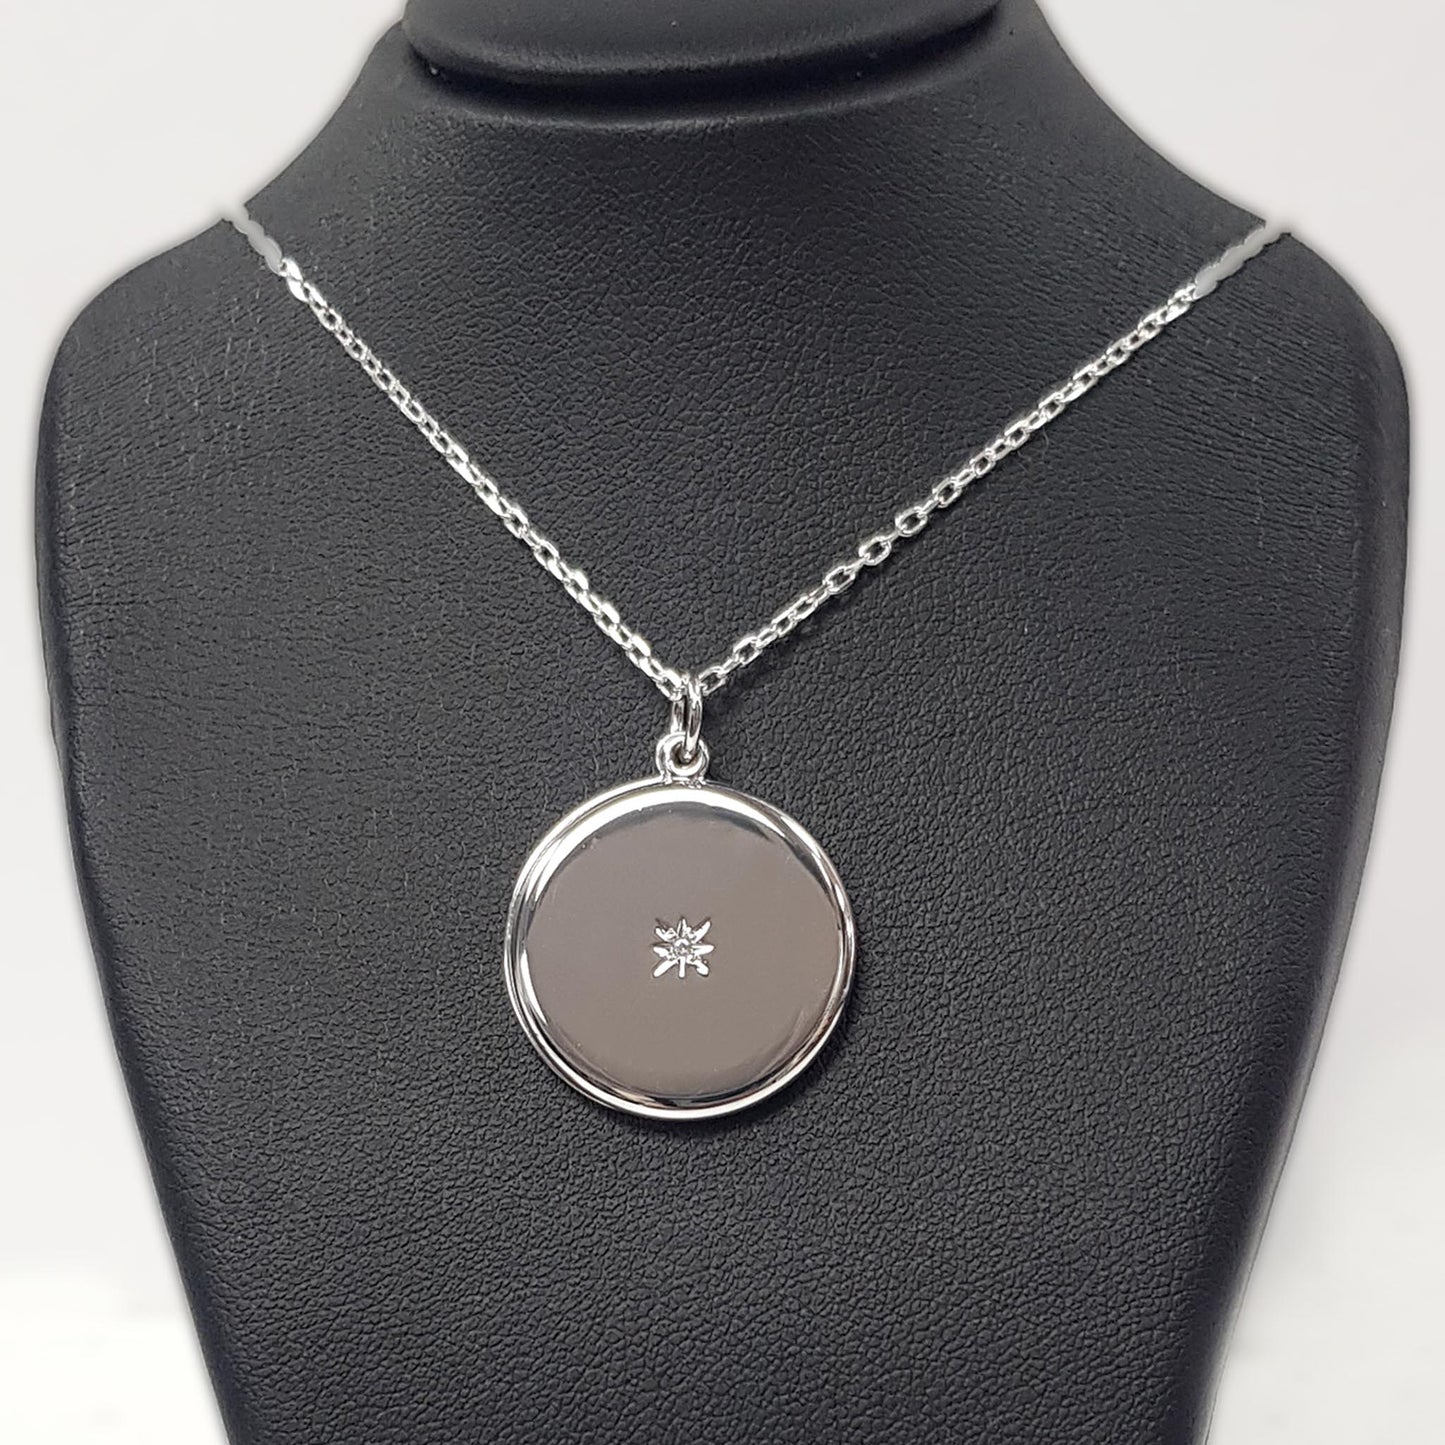 Round sterling silver locket with chain photographed on a black bust